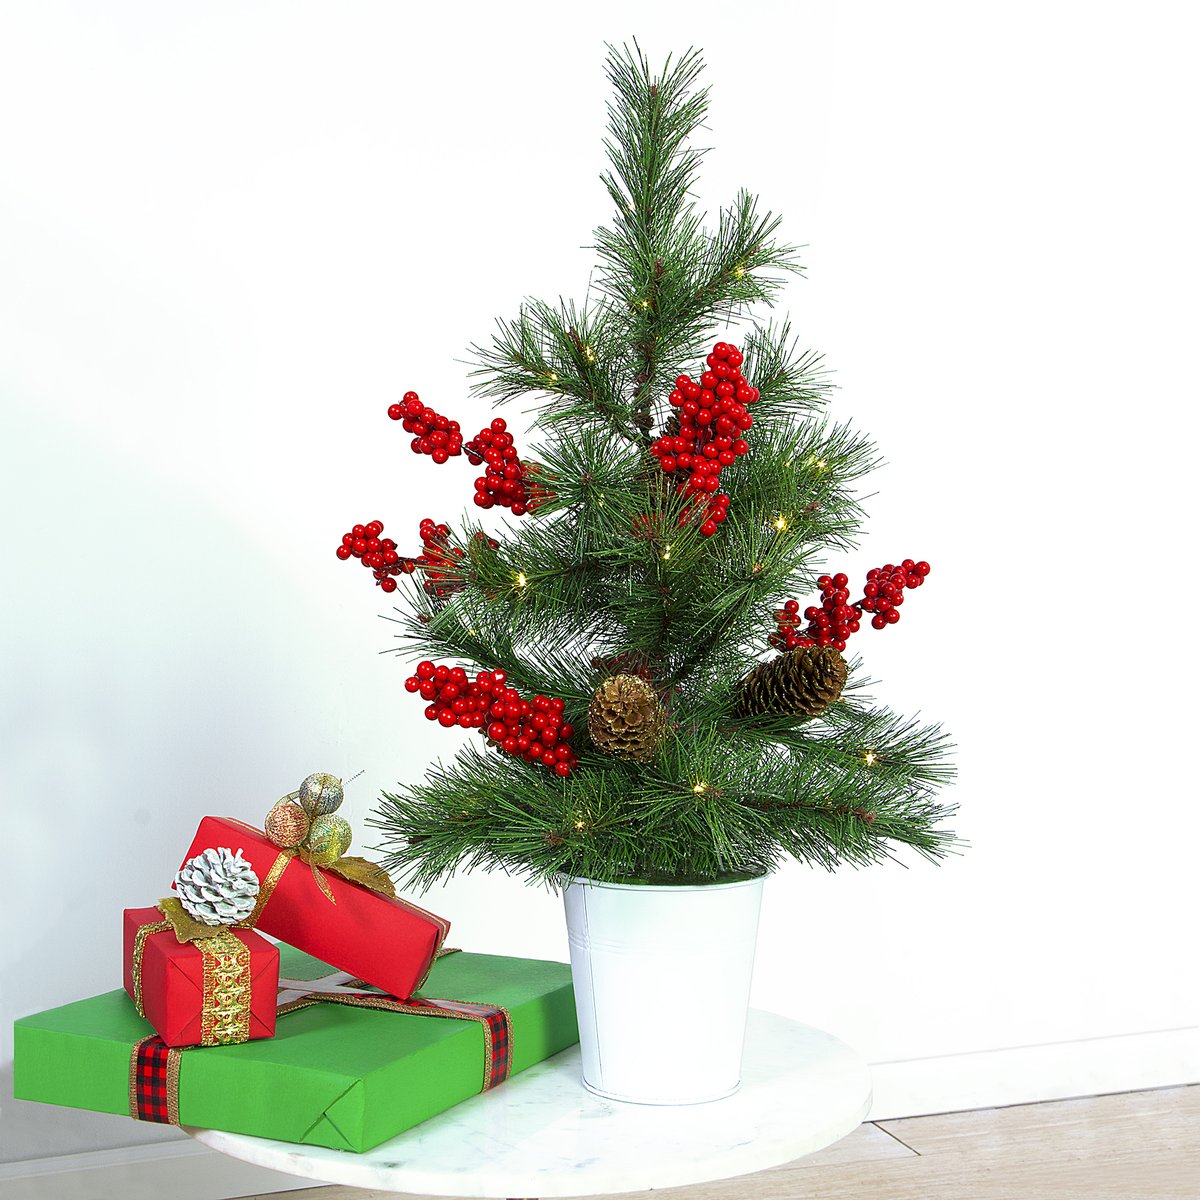 Easy Treezy sells pre-lit table top trees. These little trees are perfect for a small table, desk, or as a gift. #easytreezy #tabletoptrees #easychristmasdecorating #smallchristmastrees